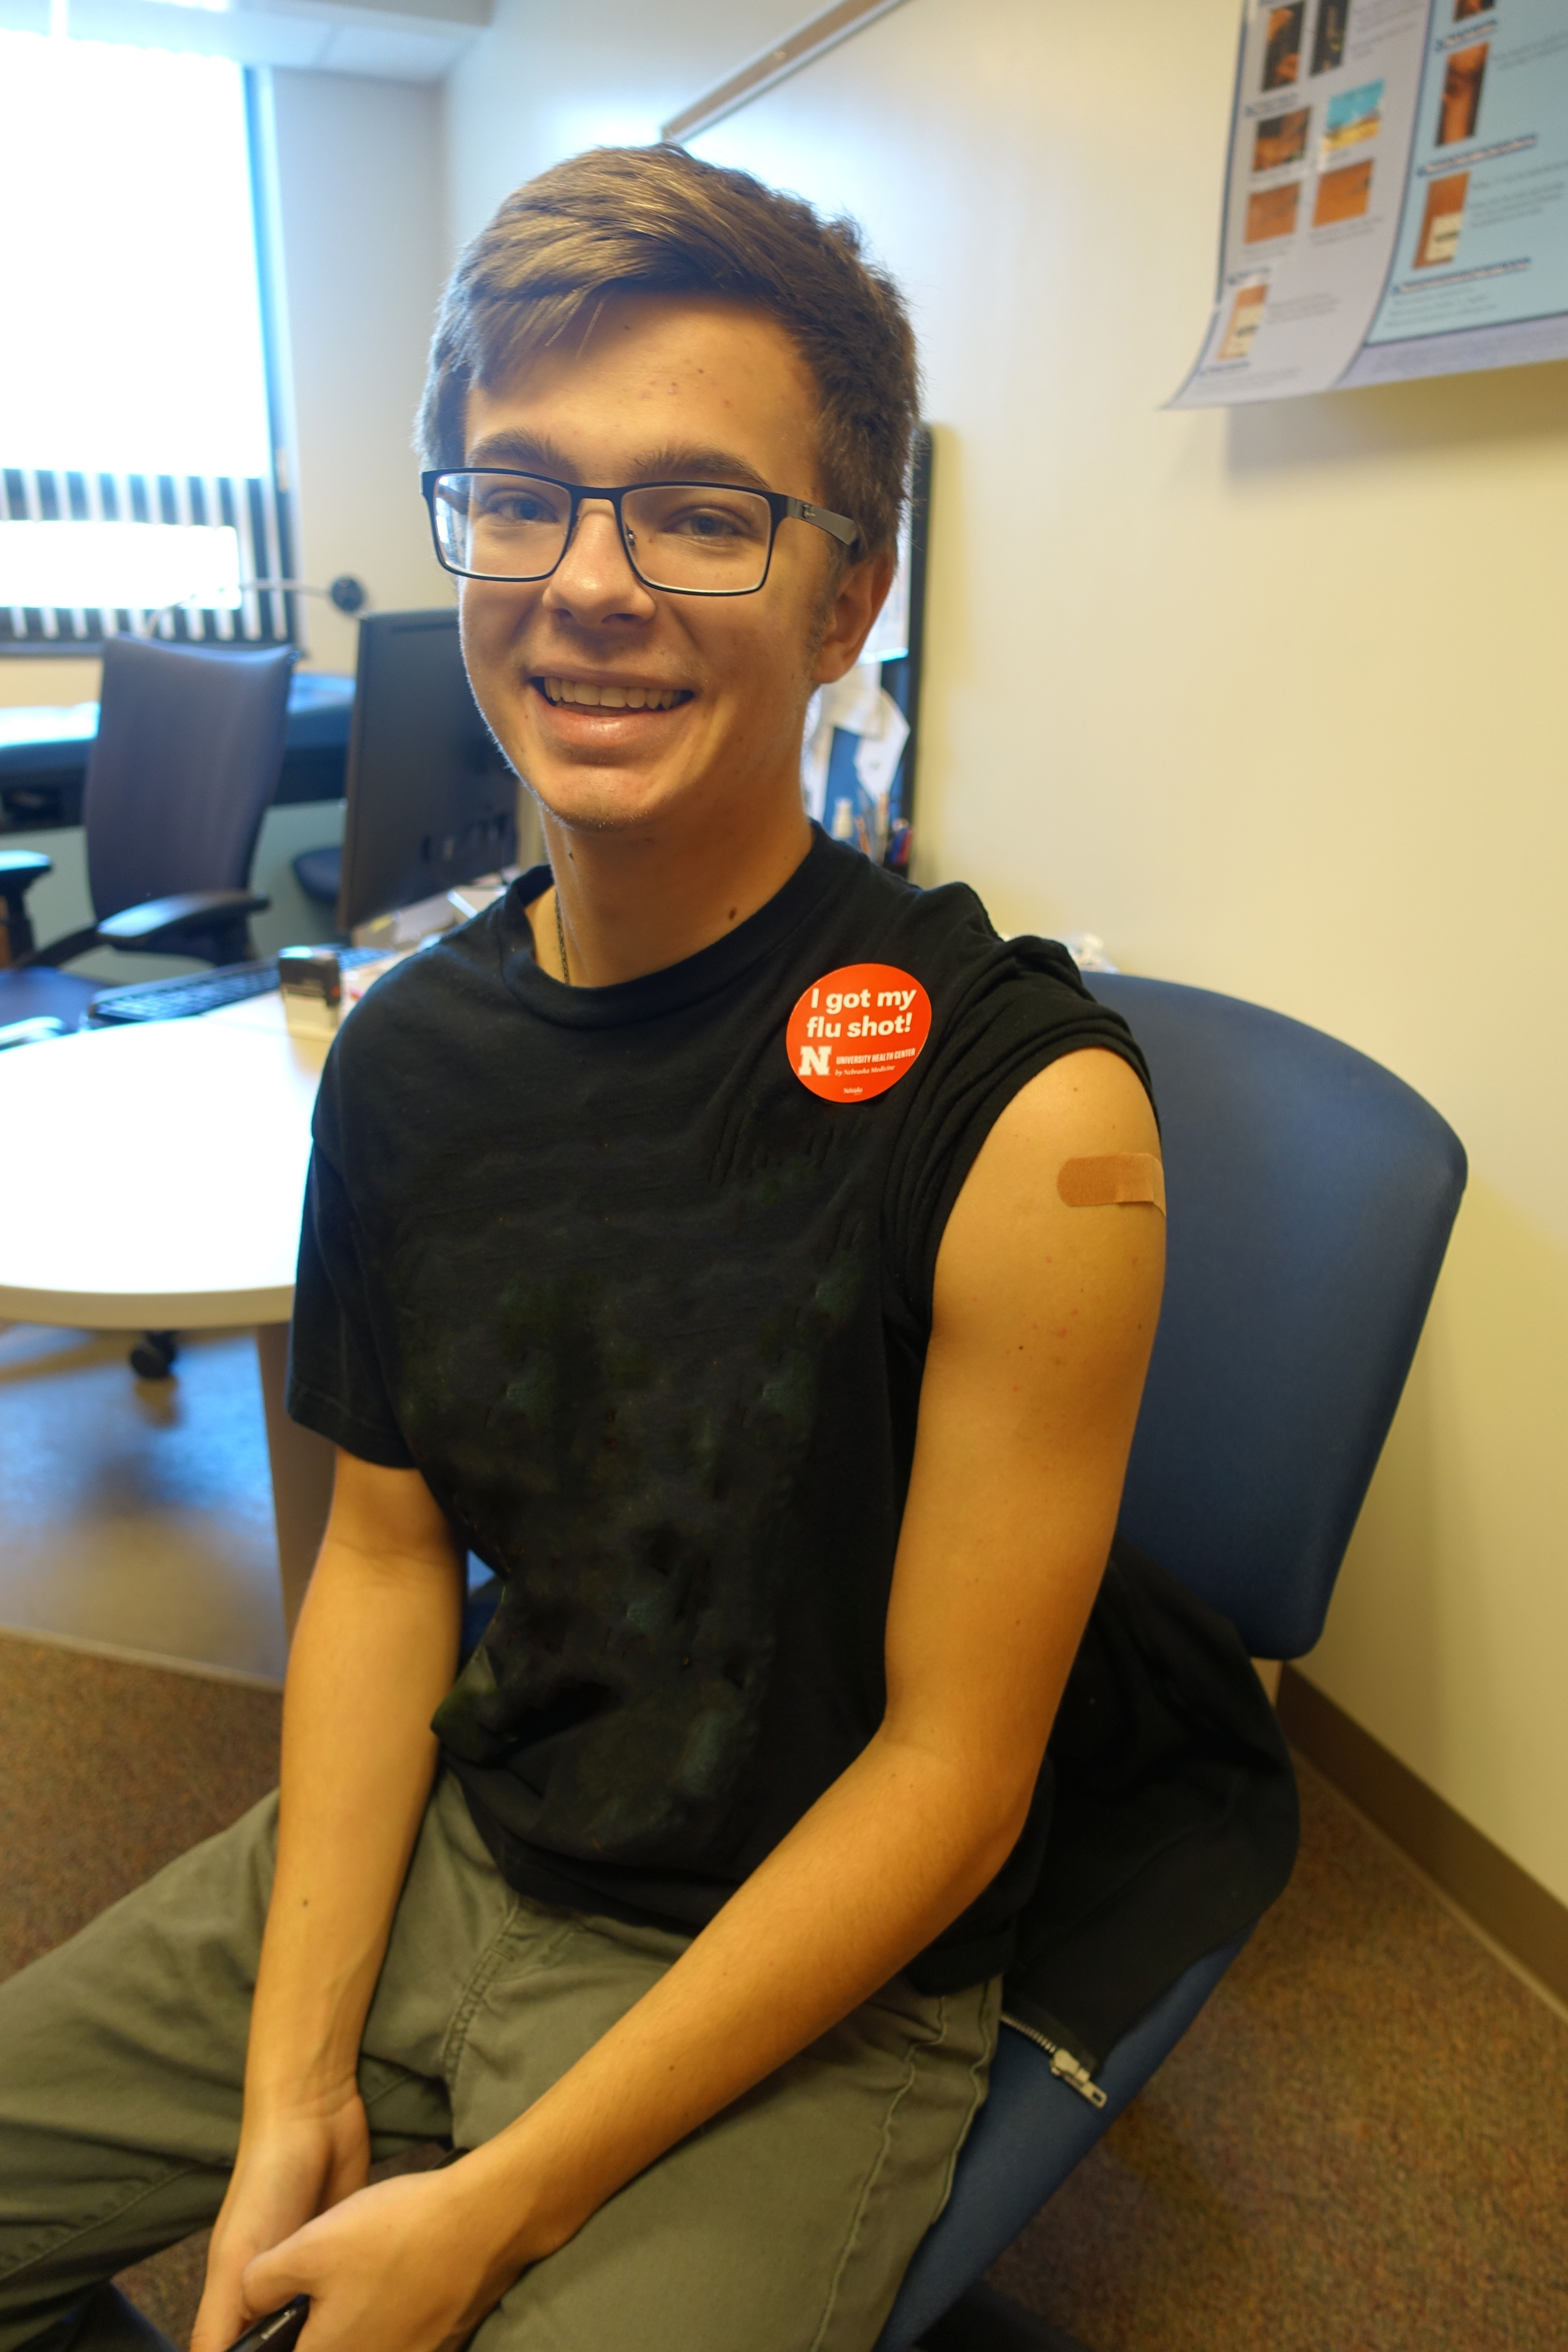 Free flu shots from the University Health Center make it convenient for students to protect against the flu.